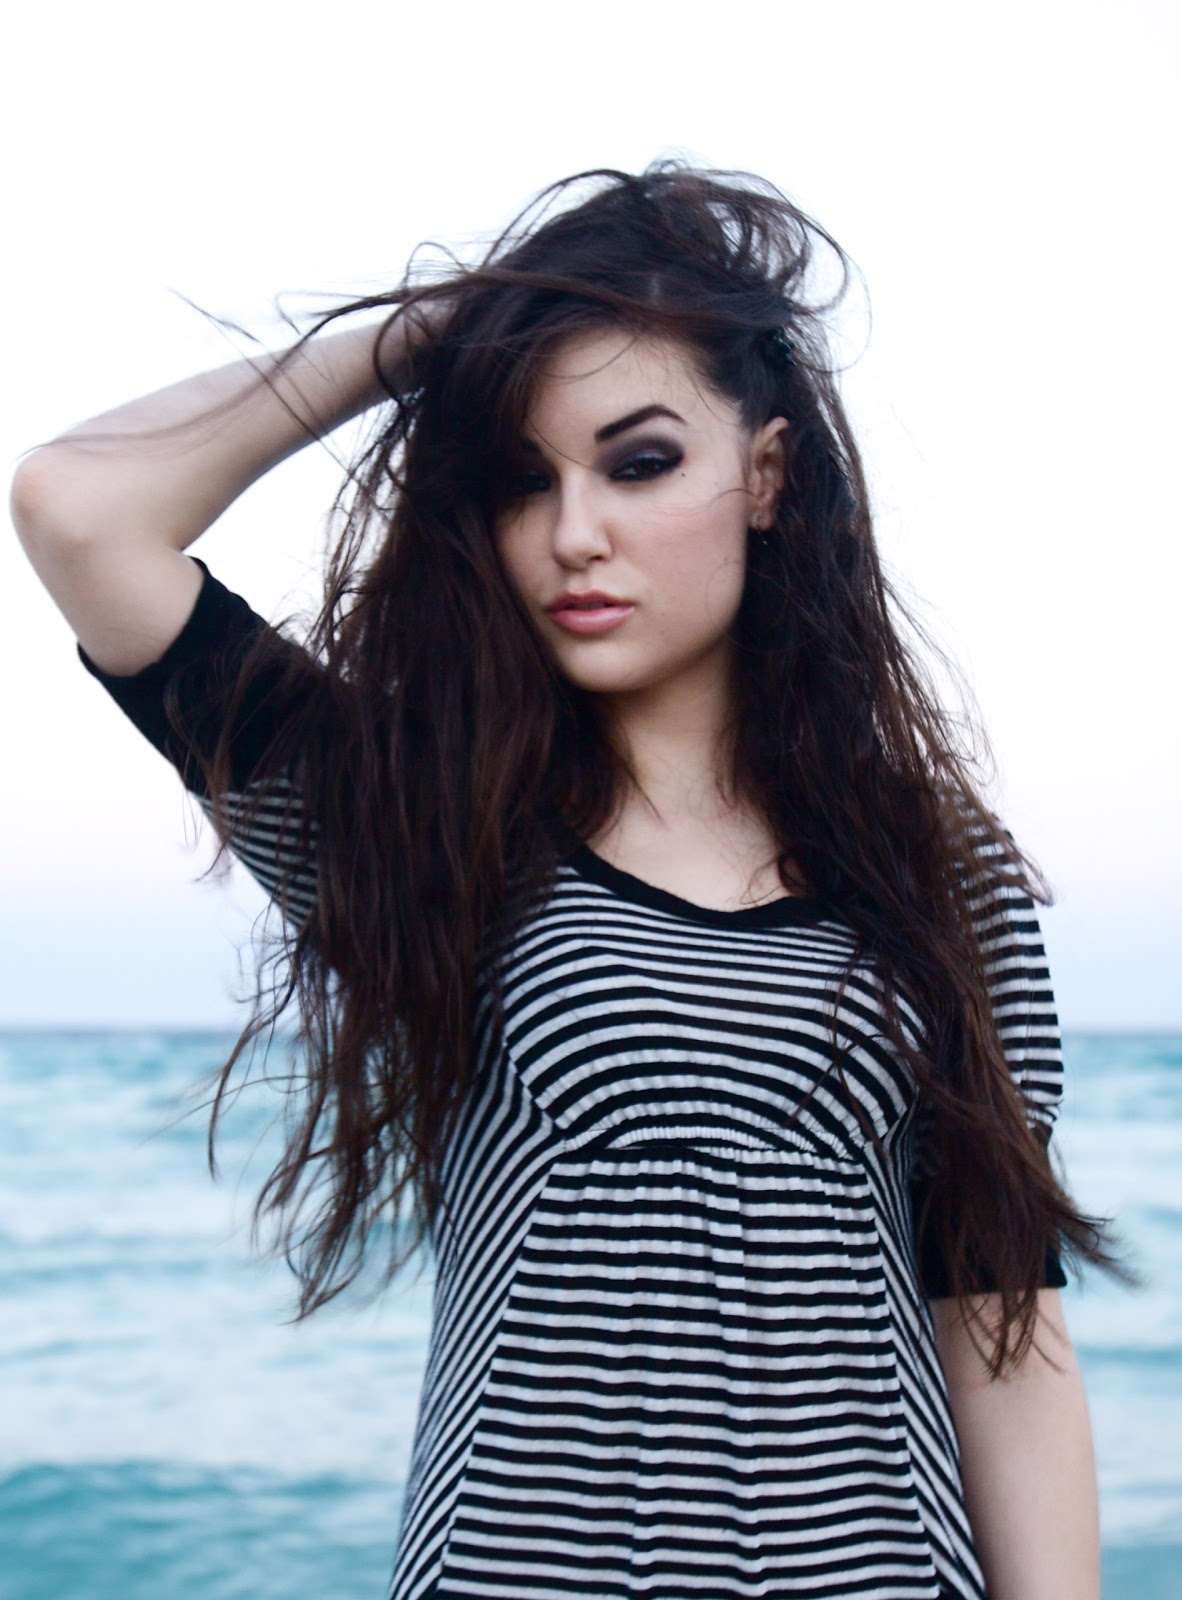 Popular actress Sasha Grey wallpapers and images - wallpapers, pictures ...